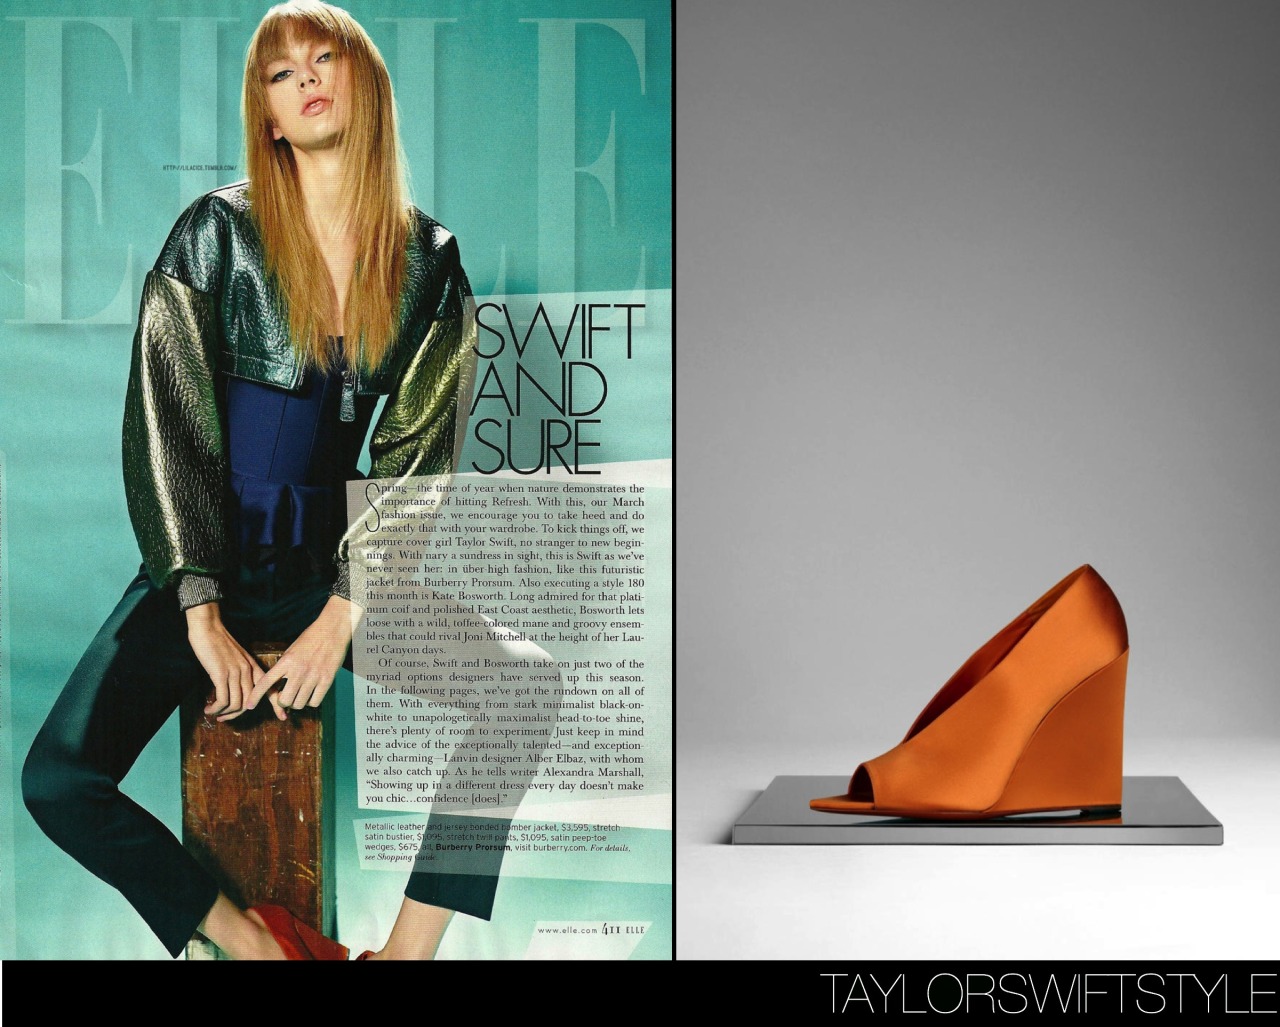 In a photo spread for Elle magazine | March 2013Burberry Prorsum &#8216;Satin Peep-Toe Wedge Pumps&#8217; - $675.00Taylor finishes her Prorsum 60s runway look with these gorgeous wedge pumps (my favourite kind of shoe) by Burberry.Worn with: Burberry Prorsum jacket and Burberry Prorsum bustier